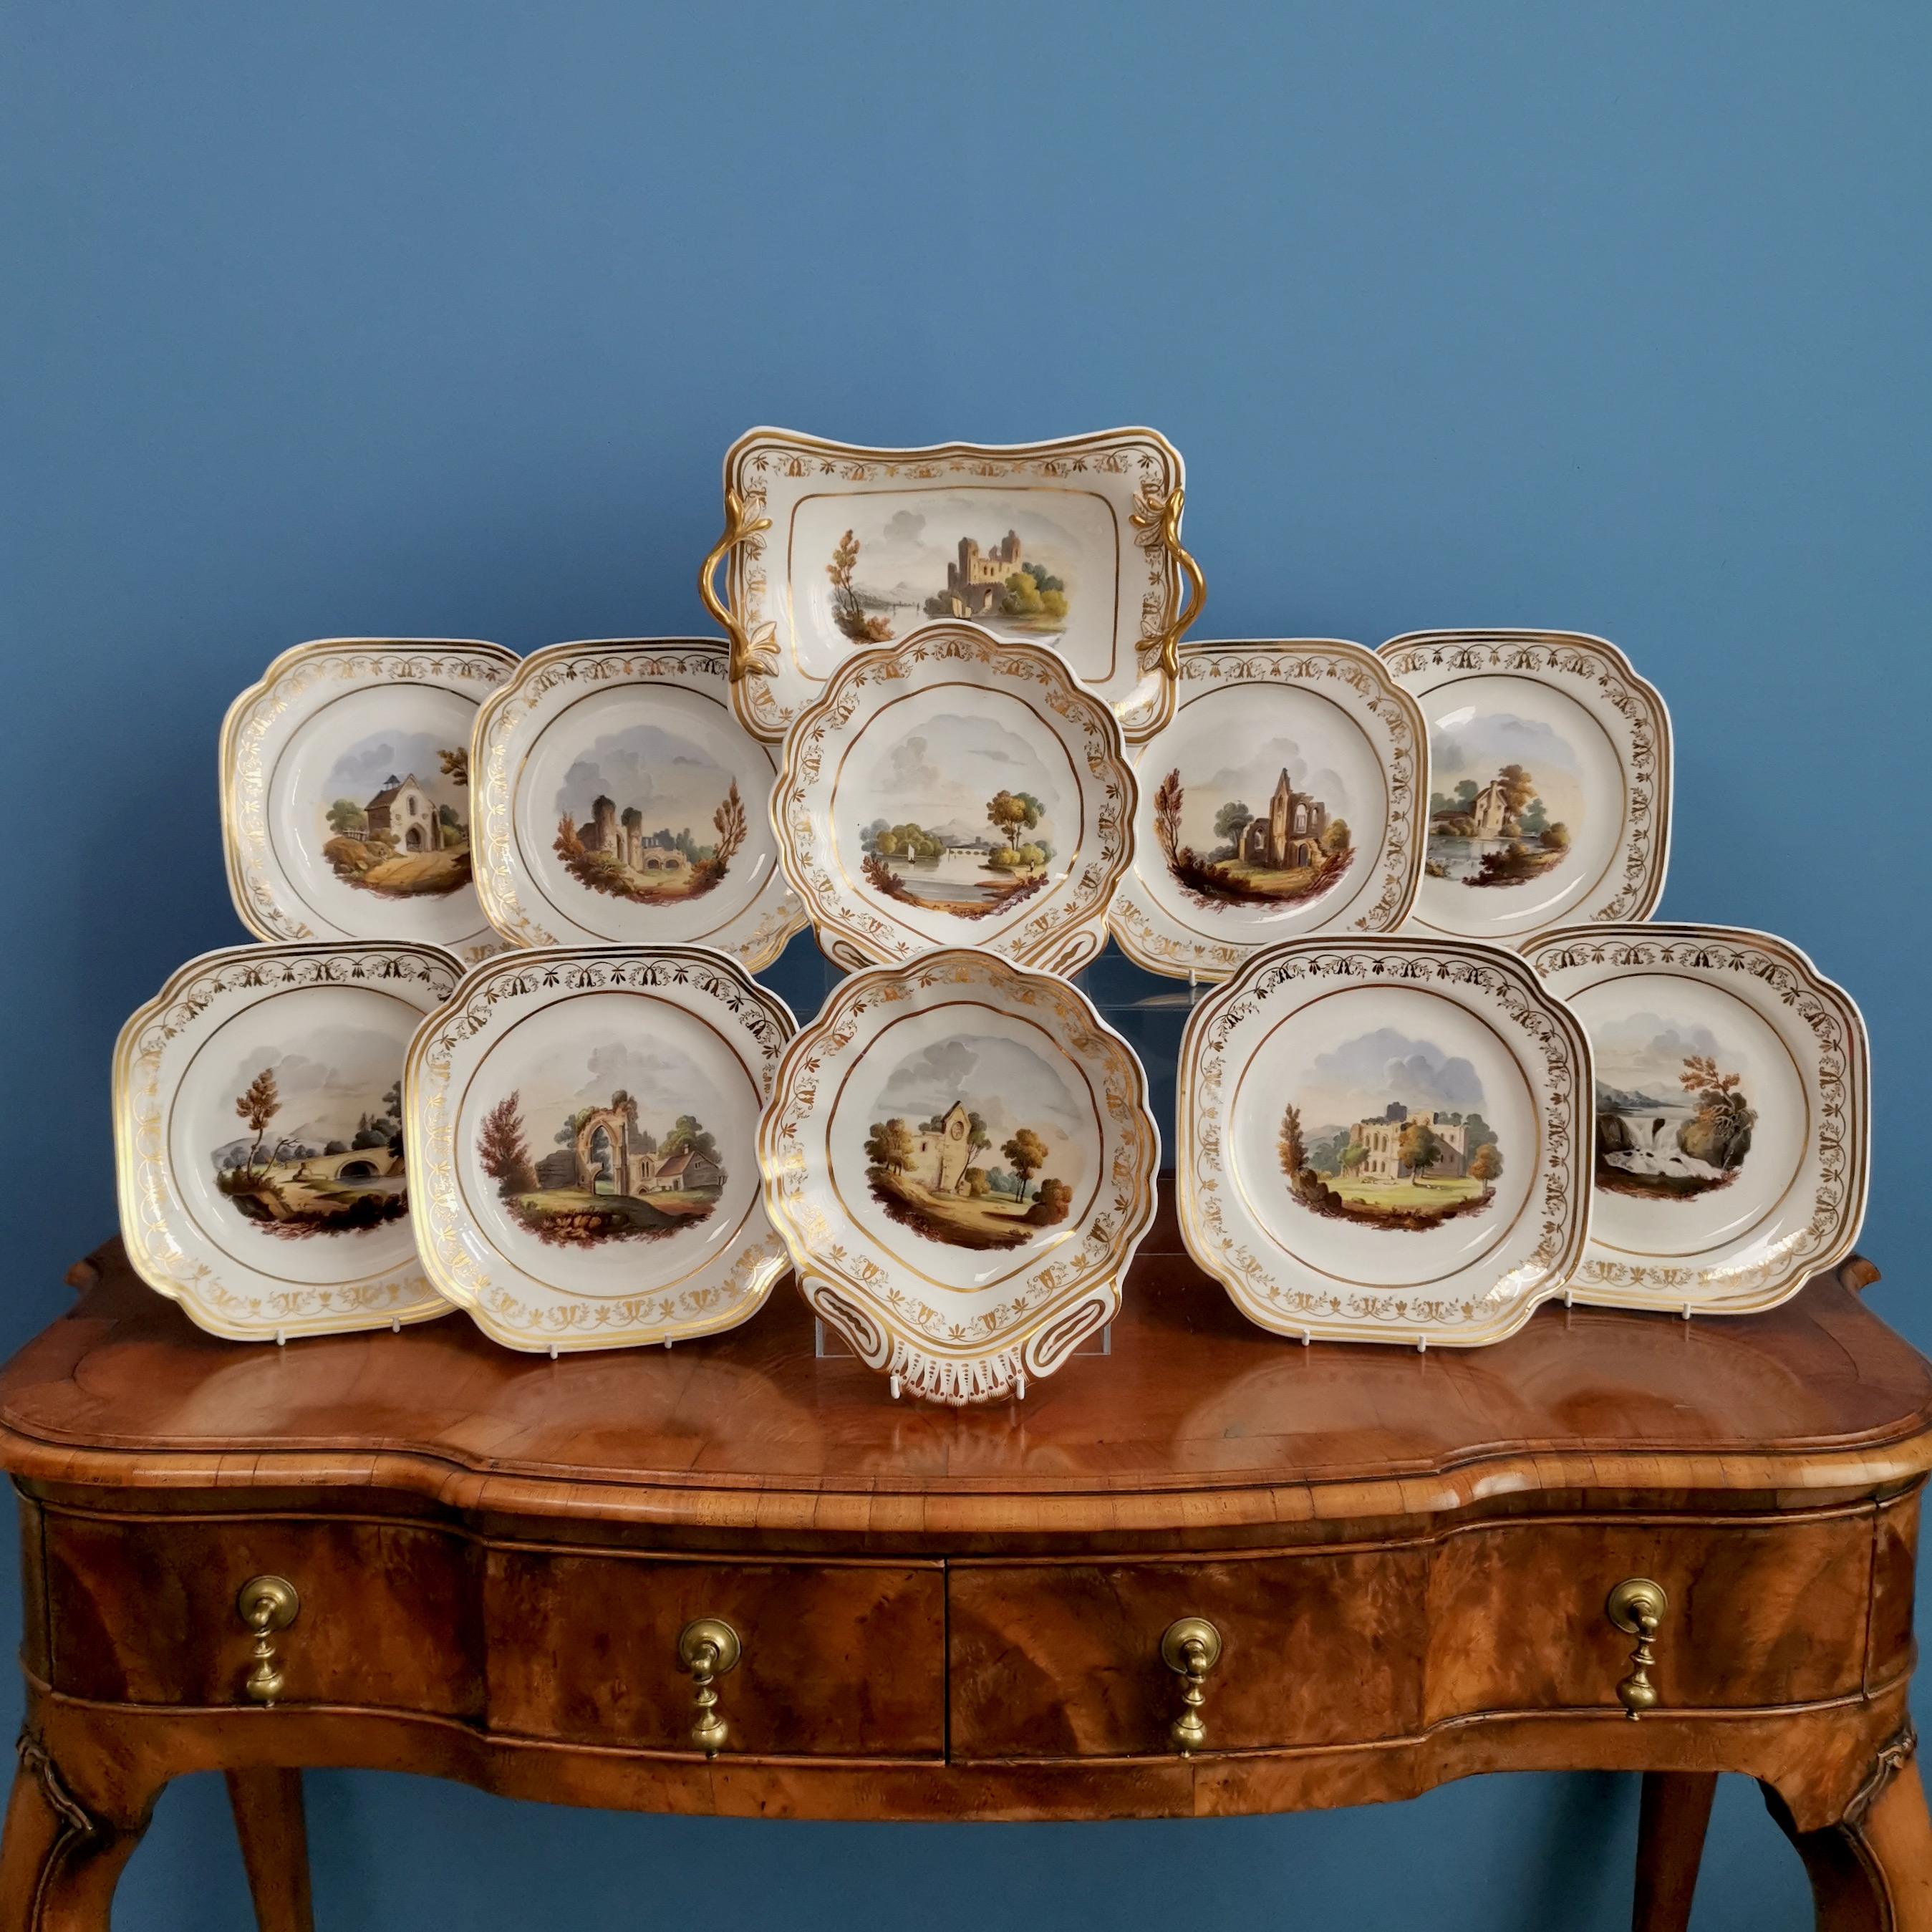 This is a stunning dessert service made by Spode in about 1820, which was the Regency era. The service is made of Felspar porcelain and decorated with beautiful hand painted landscape scenes. The service consists of one rectangular dish, two shell